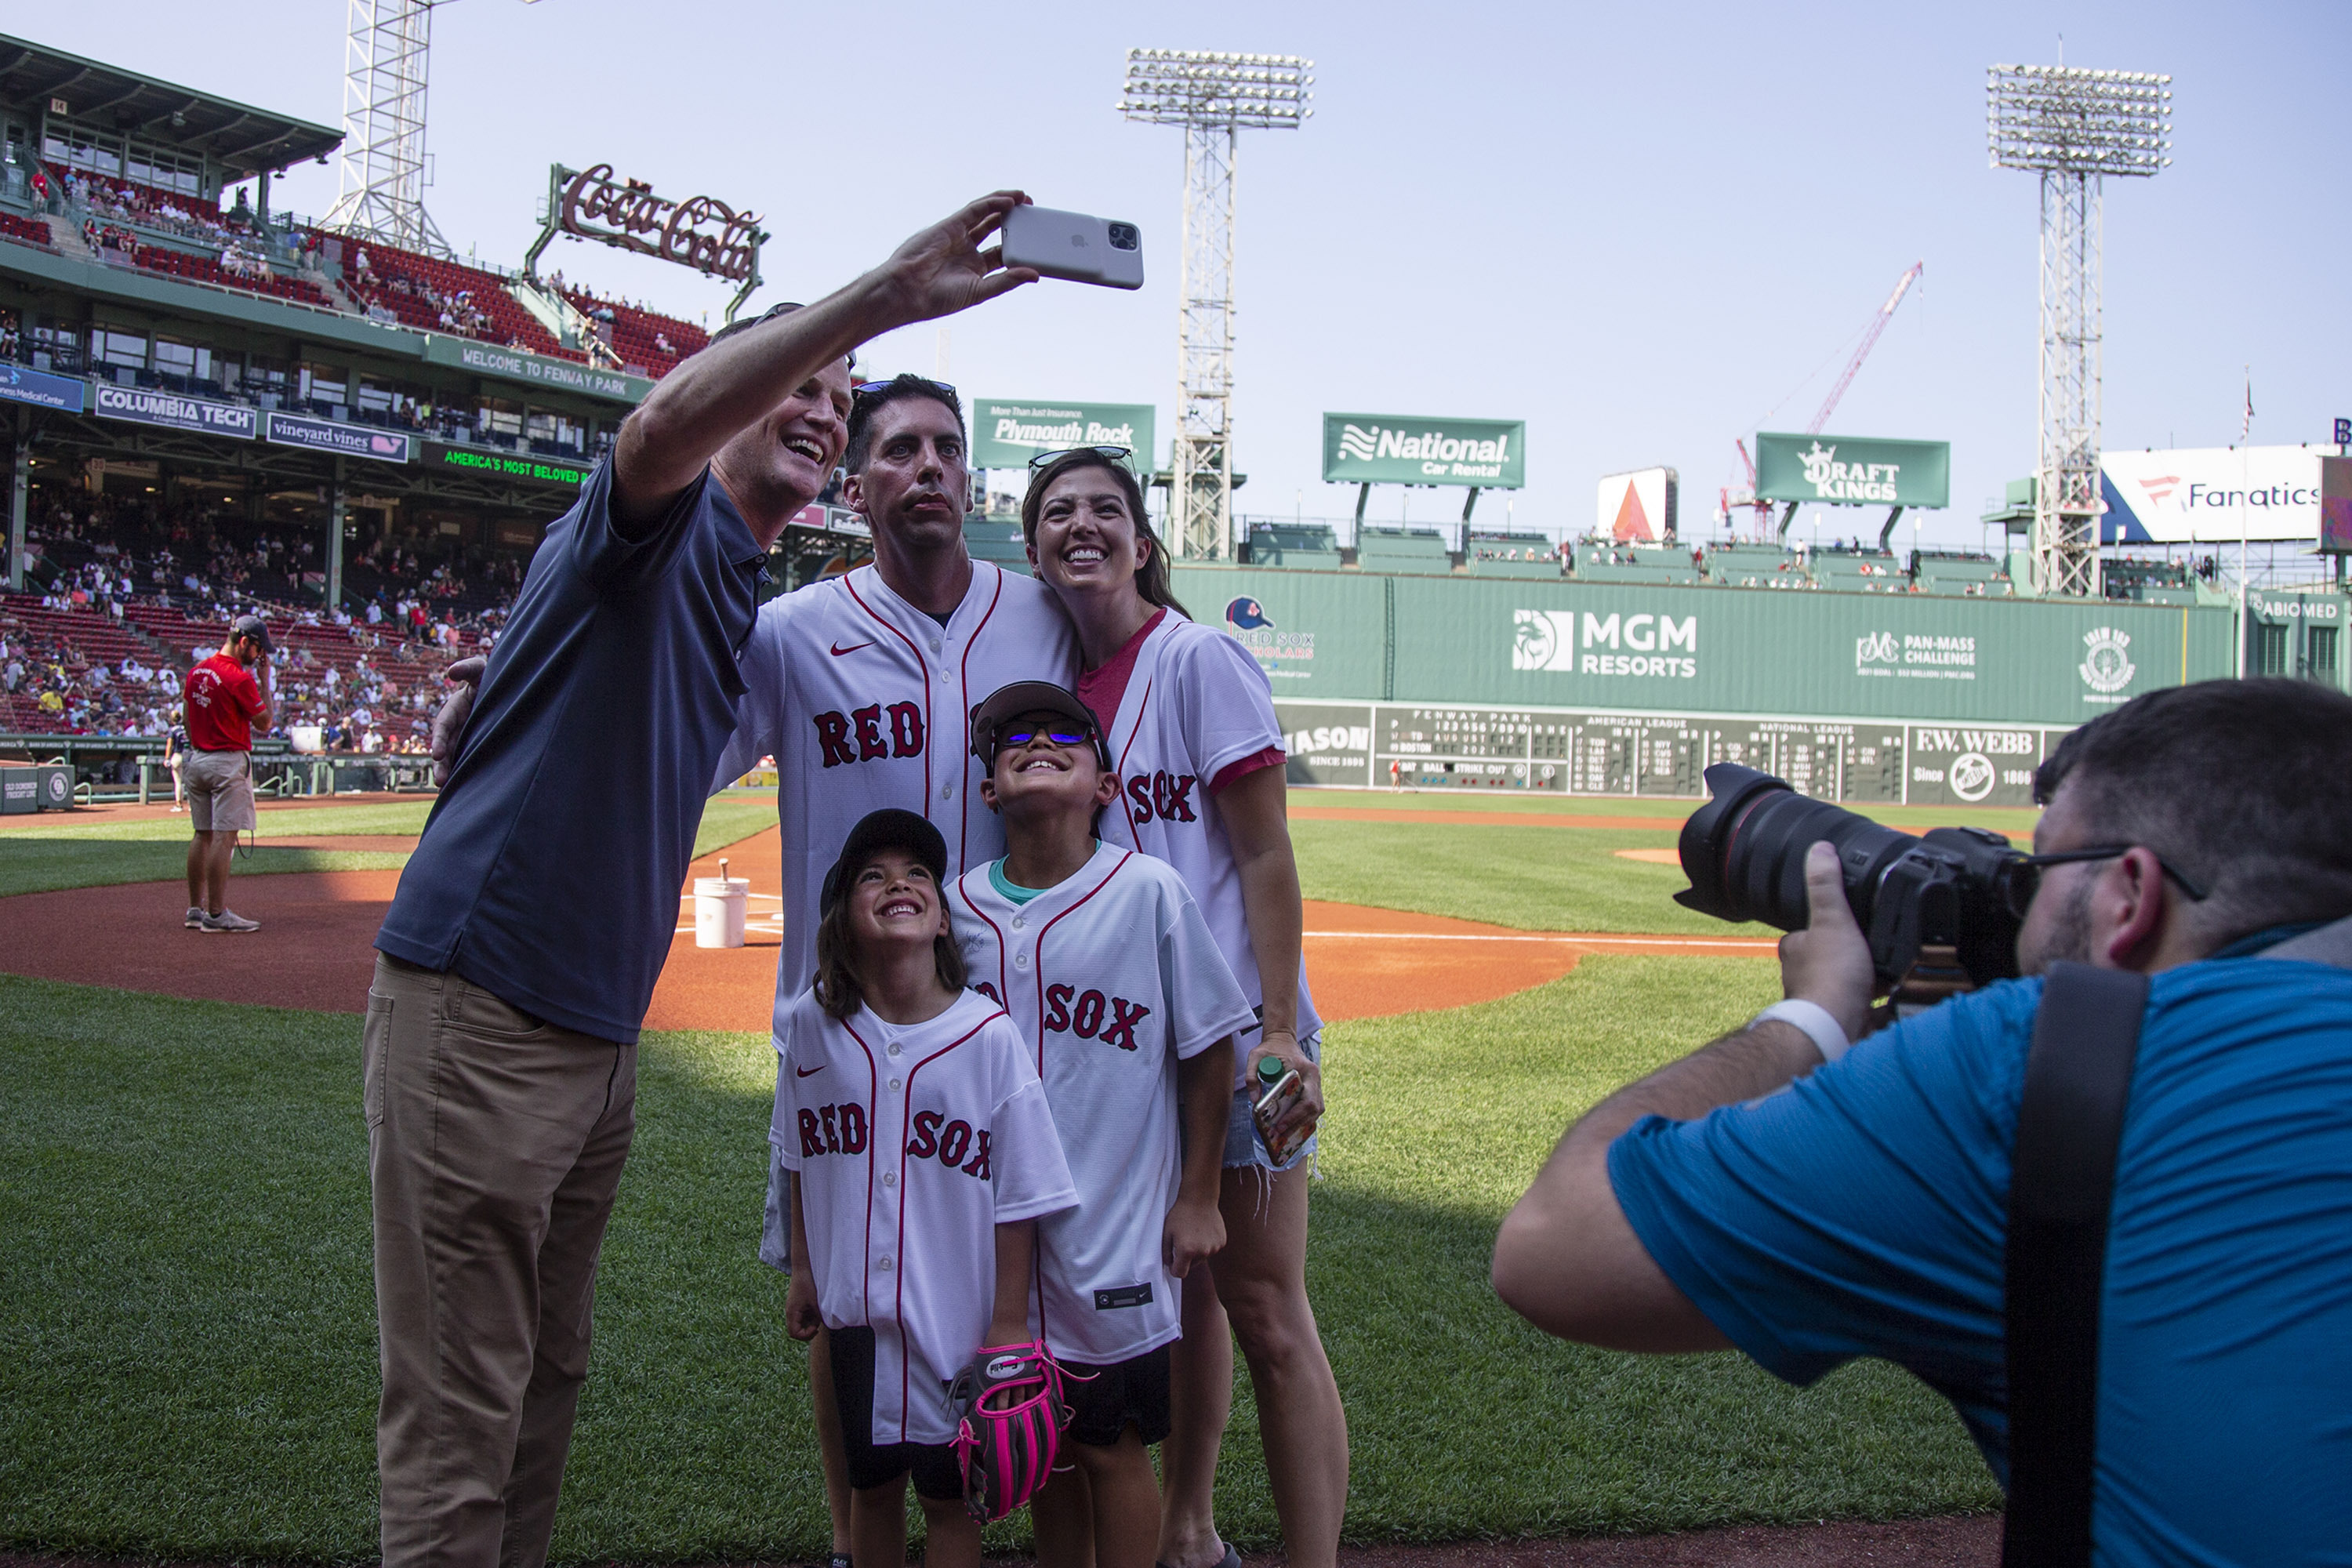 They fell in love at Fenway Park. After a terminal diagnosis, they came  home - The Boston Globe